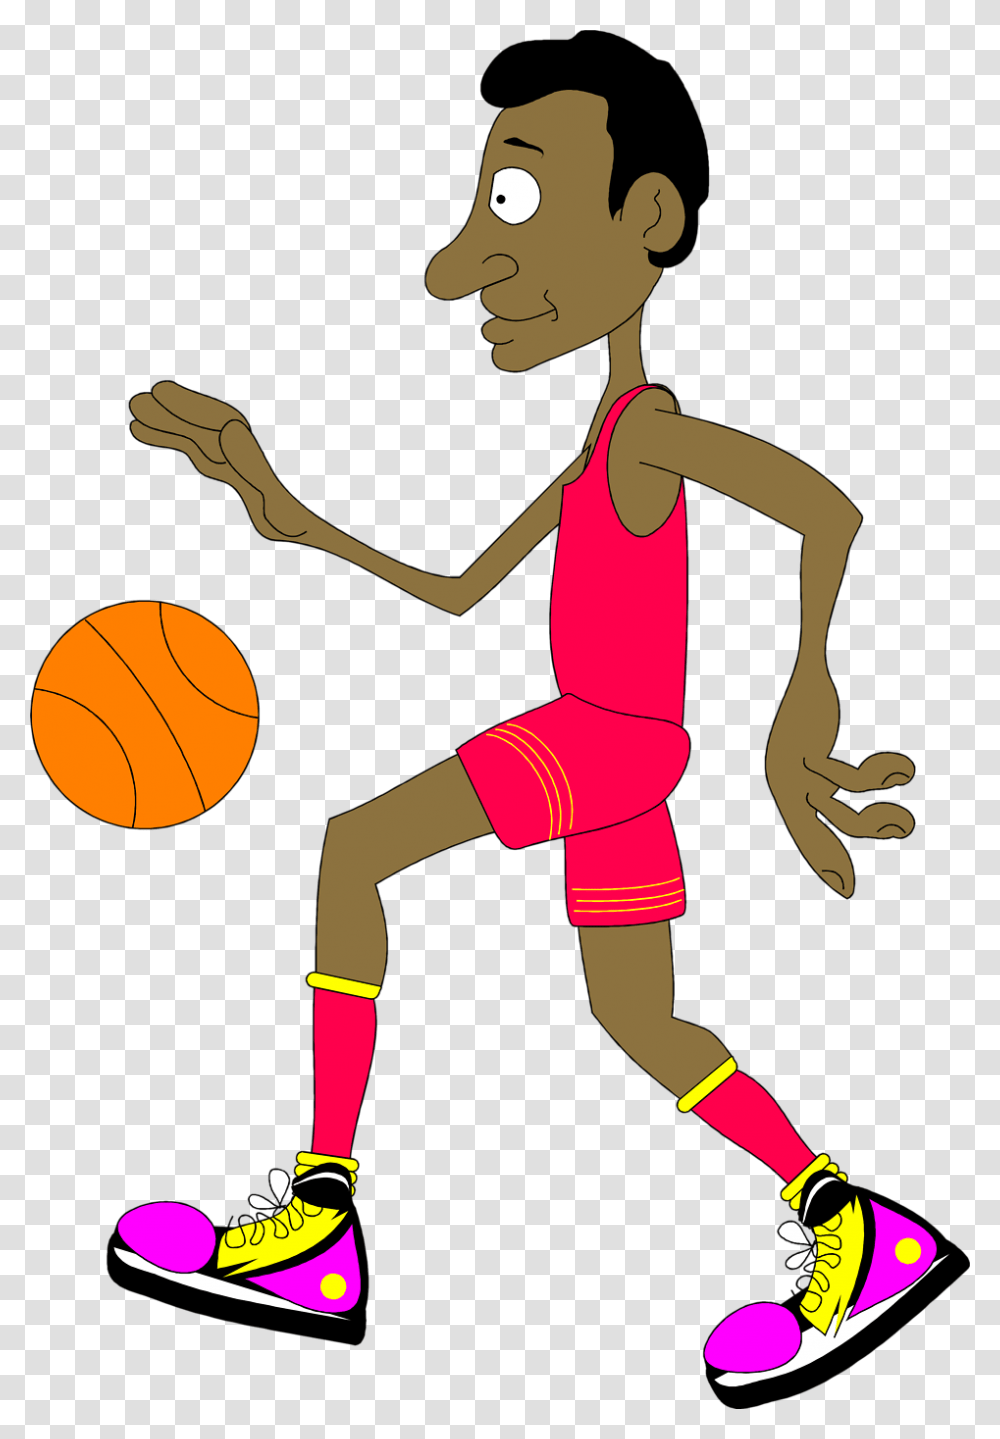 Basketball Free Stock Photo Illustration Of A Basketball, Person, Human, People, Team Sport Transparent Png